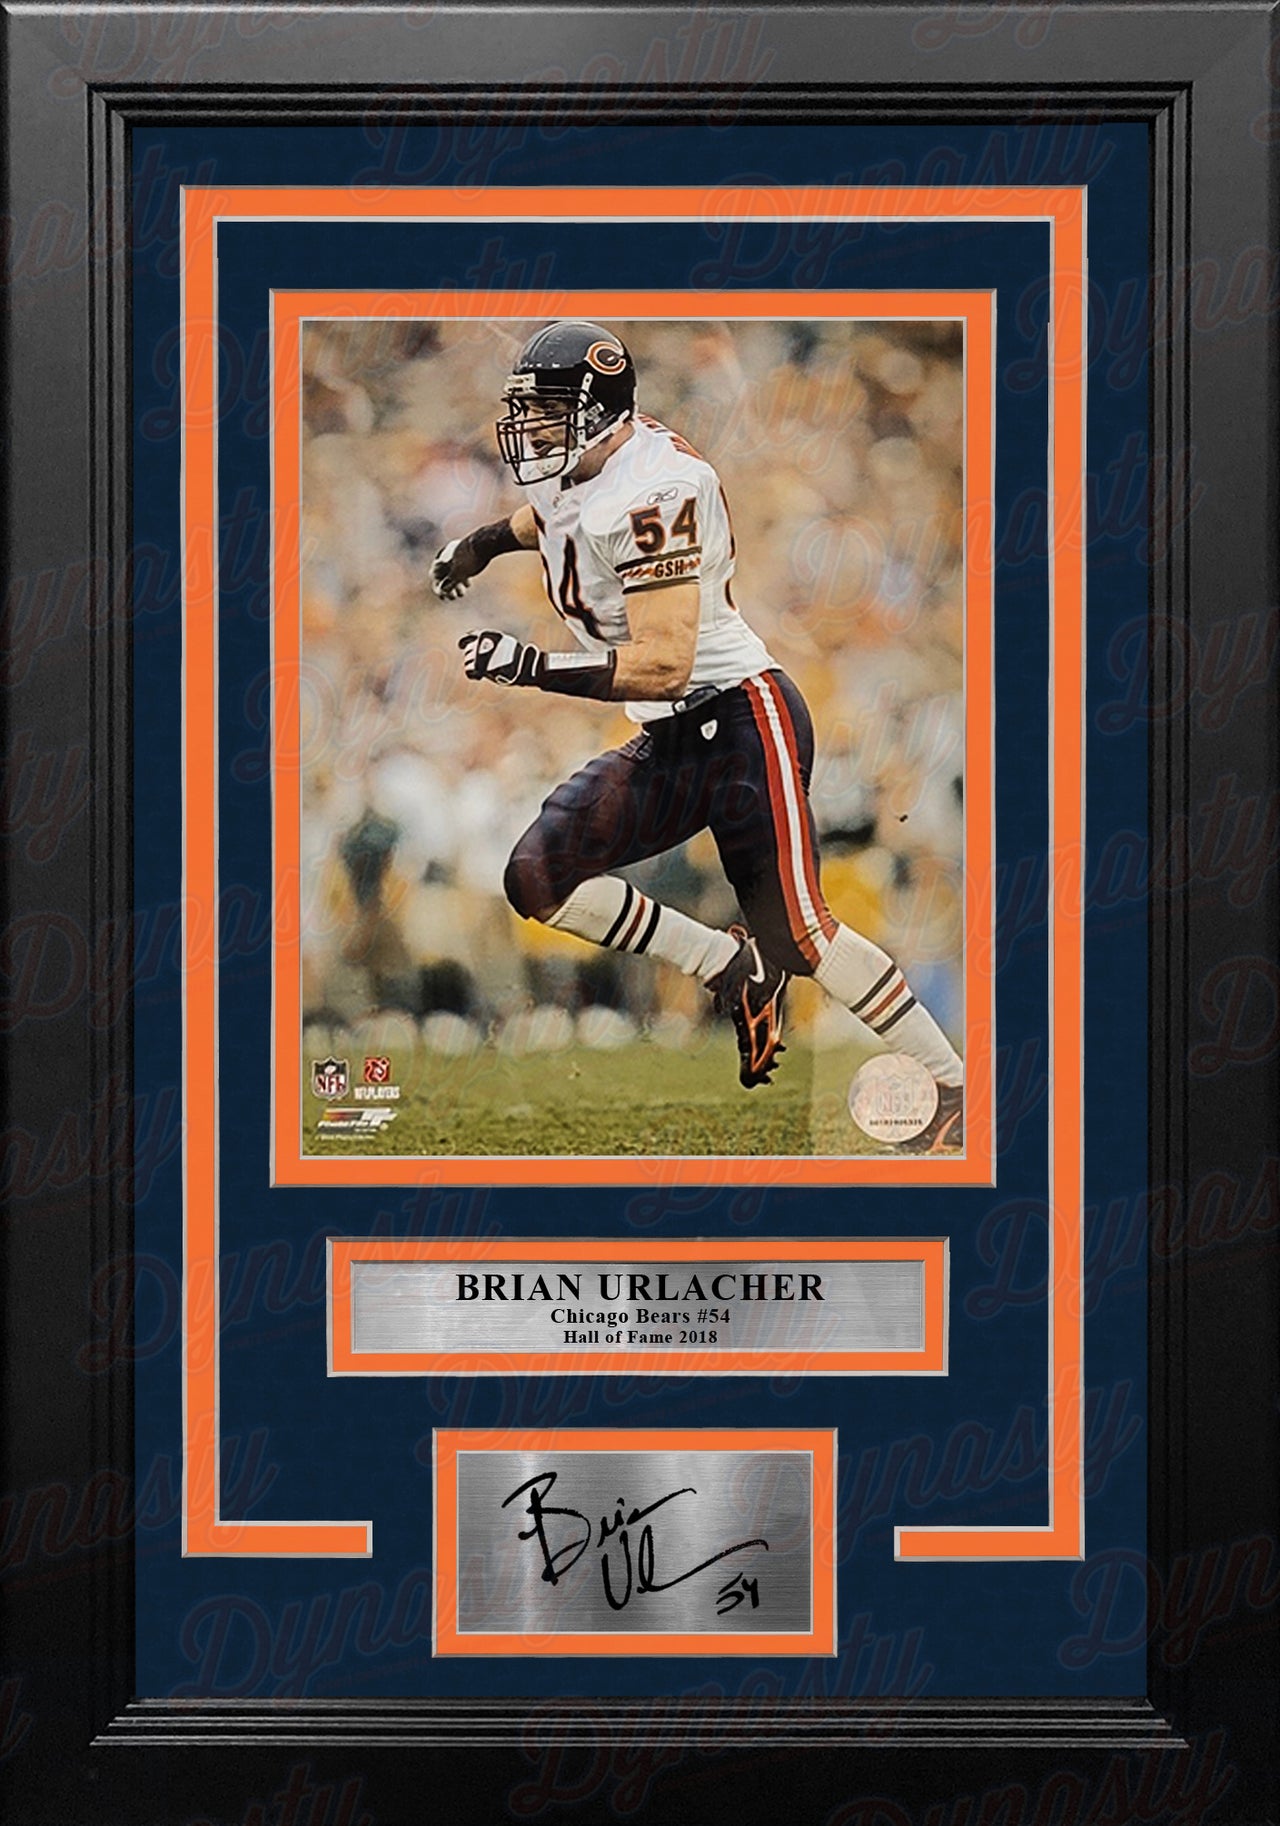 Brian Urlacher in Action Chicago Bears 8" x 10" Framed Football Photo with Engraved Autograph - Dynasty Sports & Framing 